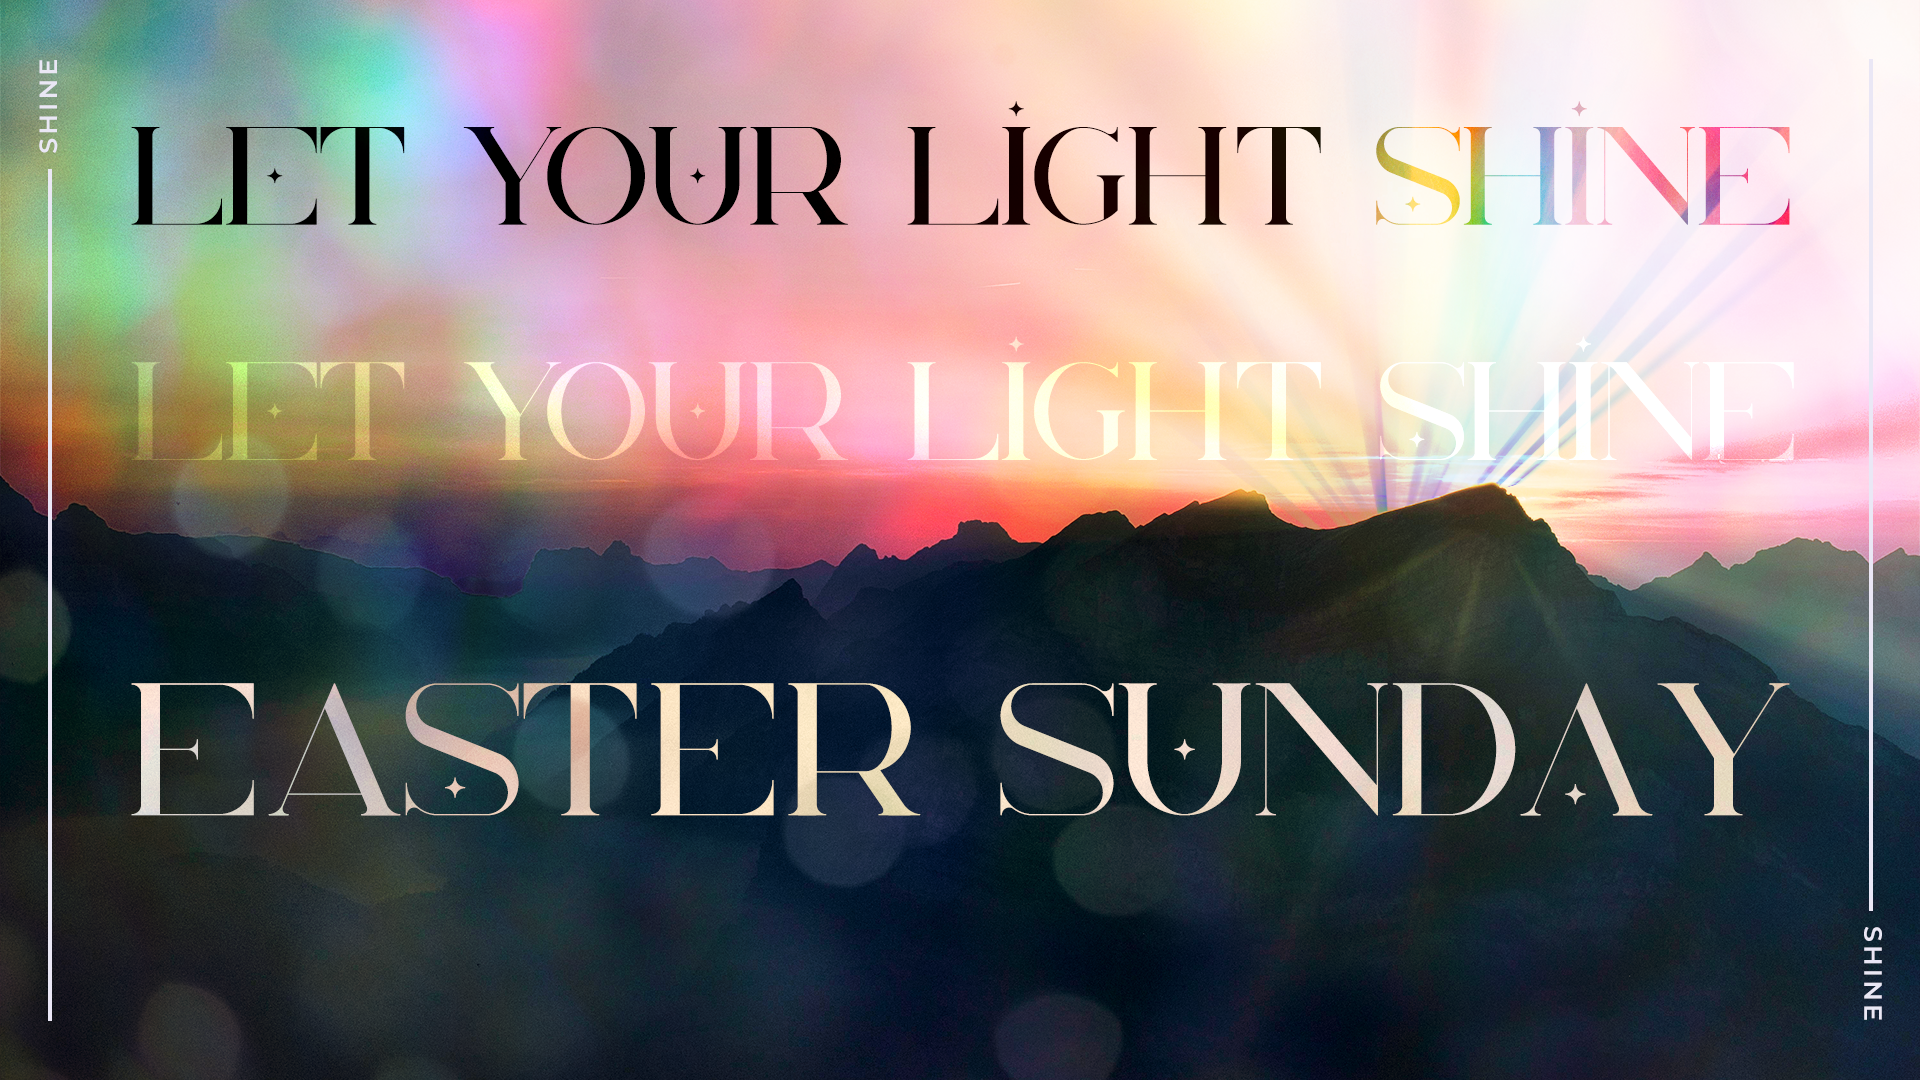 Easter graphic: Let your light shine, Easter Sunday